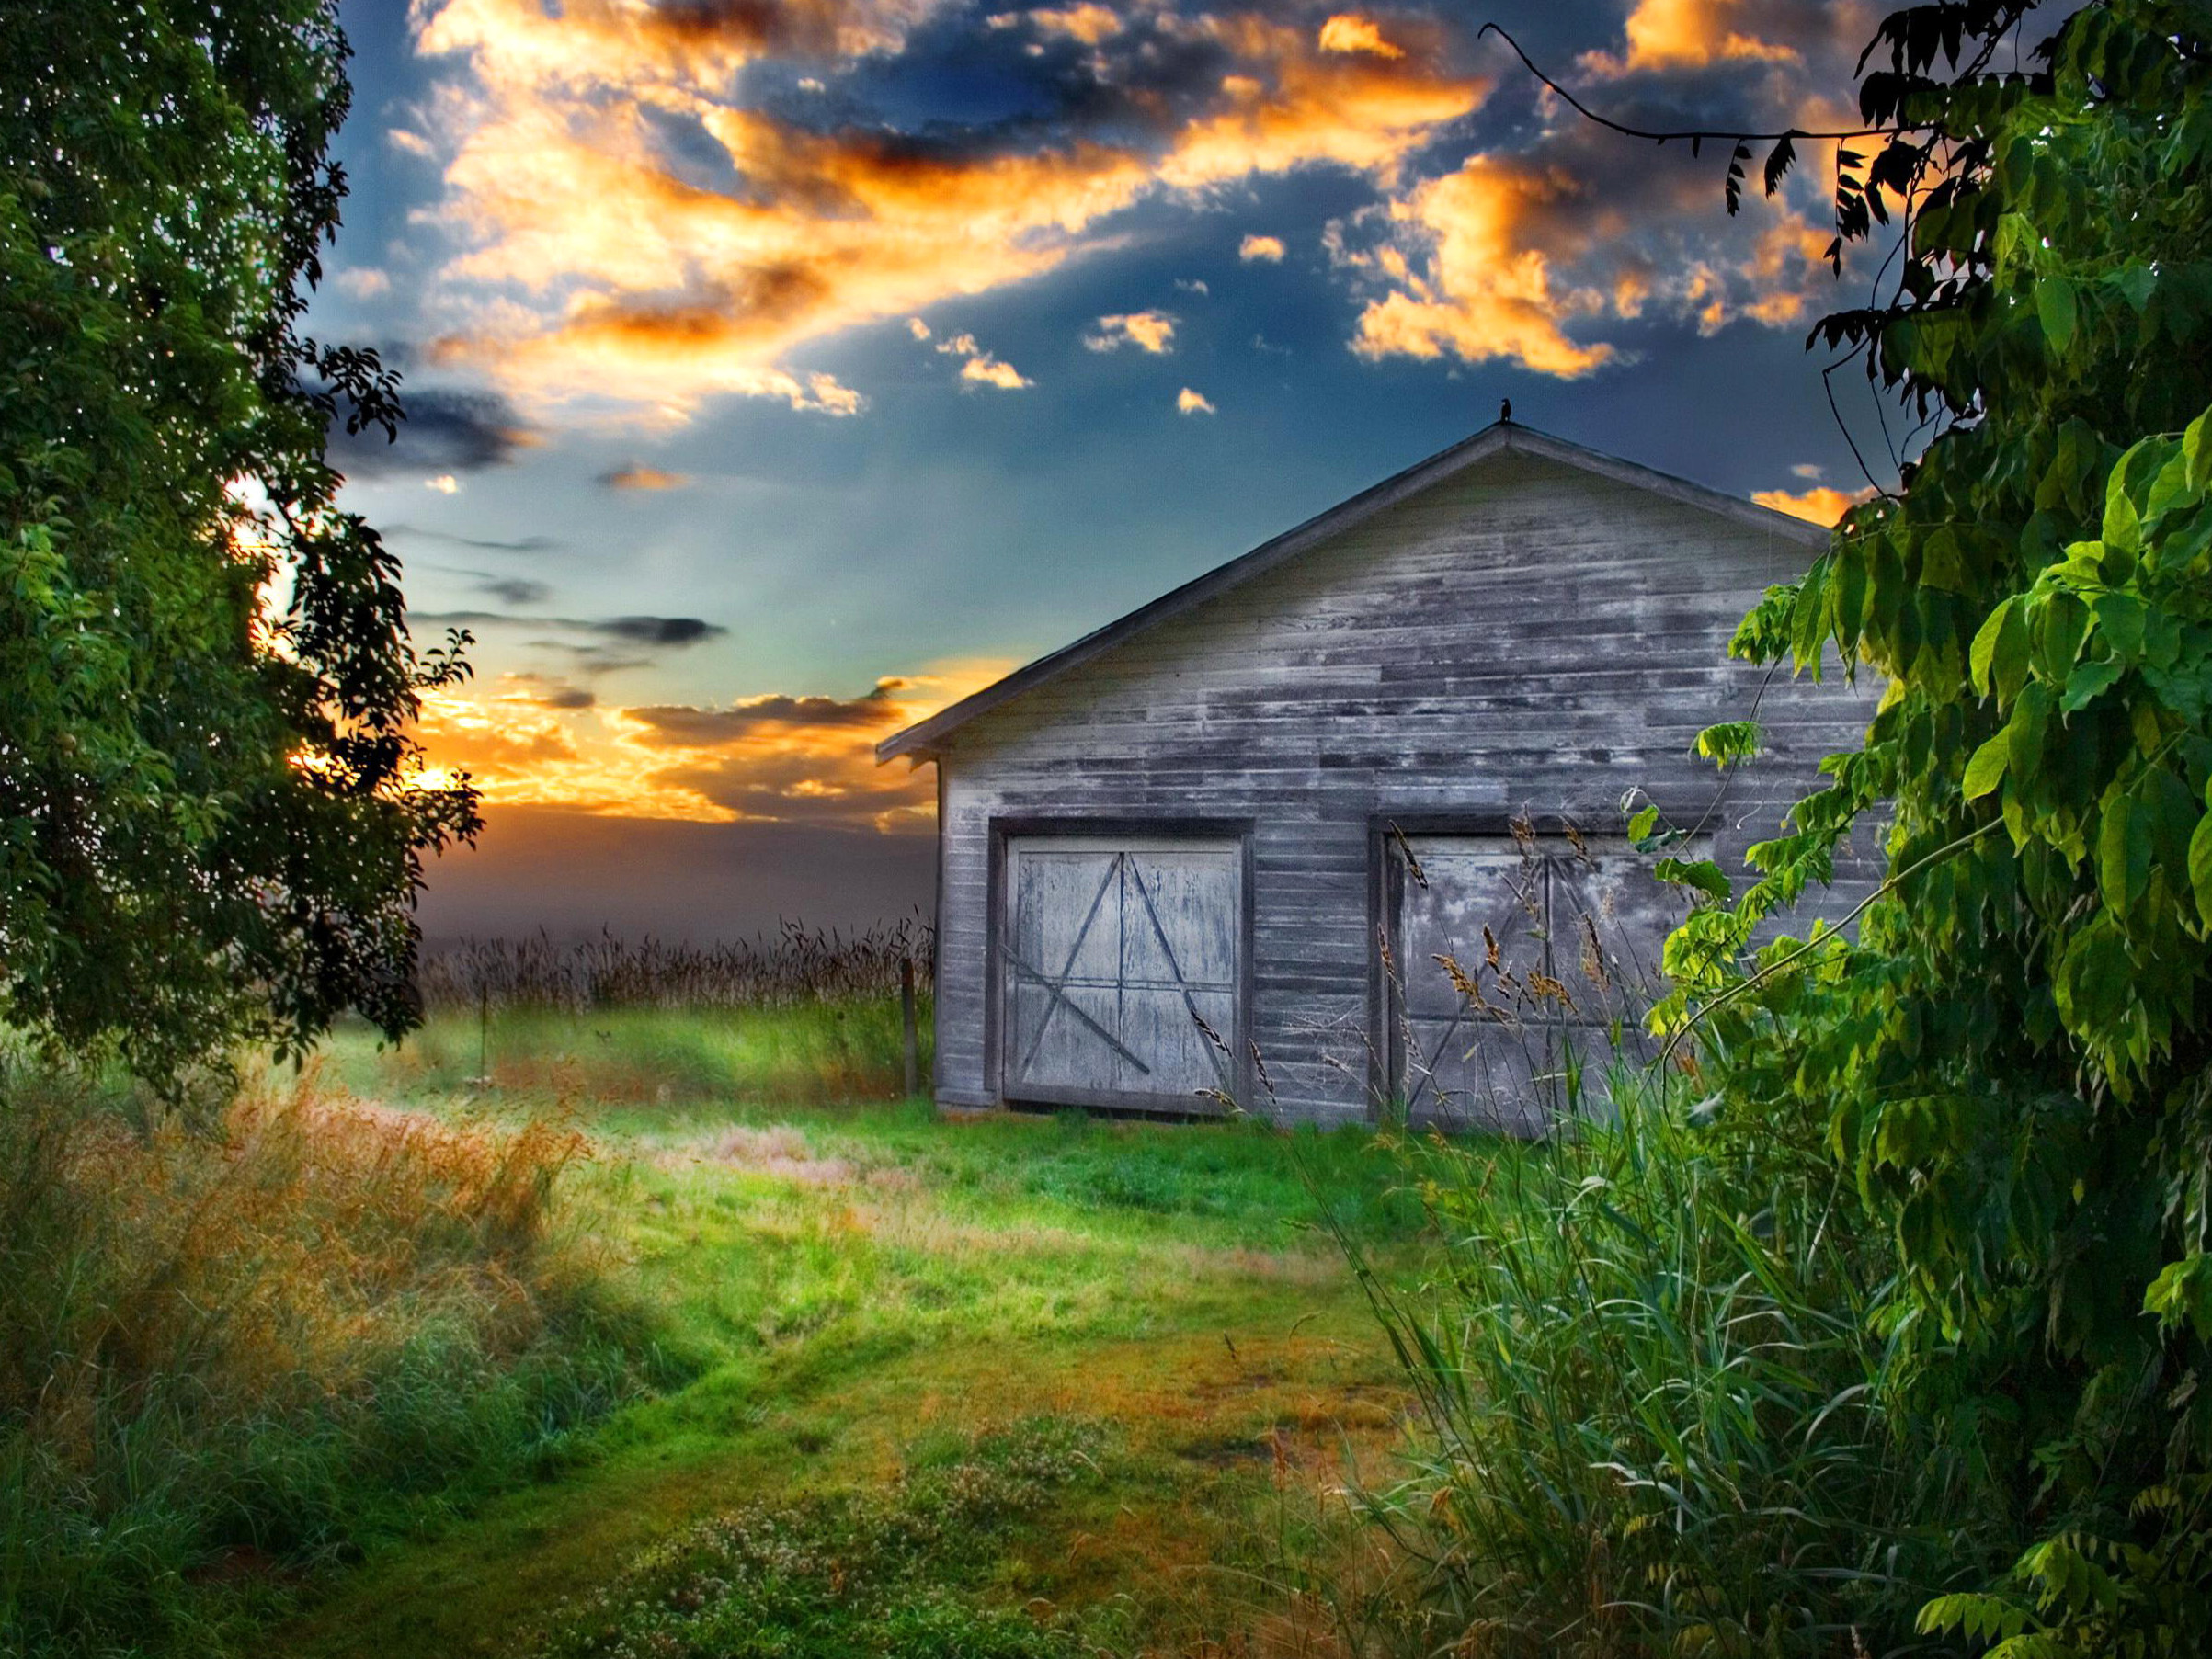 2406x1805 An, Old, Barn, At, Sunset, Desktop Wallpapers, Hd Free Photos, Cool,  Awesome Houses, Landscape Wallpaper, Garden, House Images, Windows Desktop  Images, ...